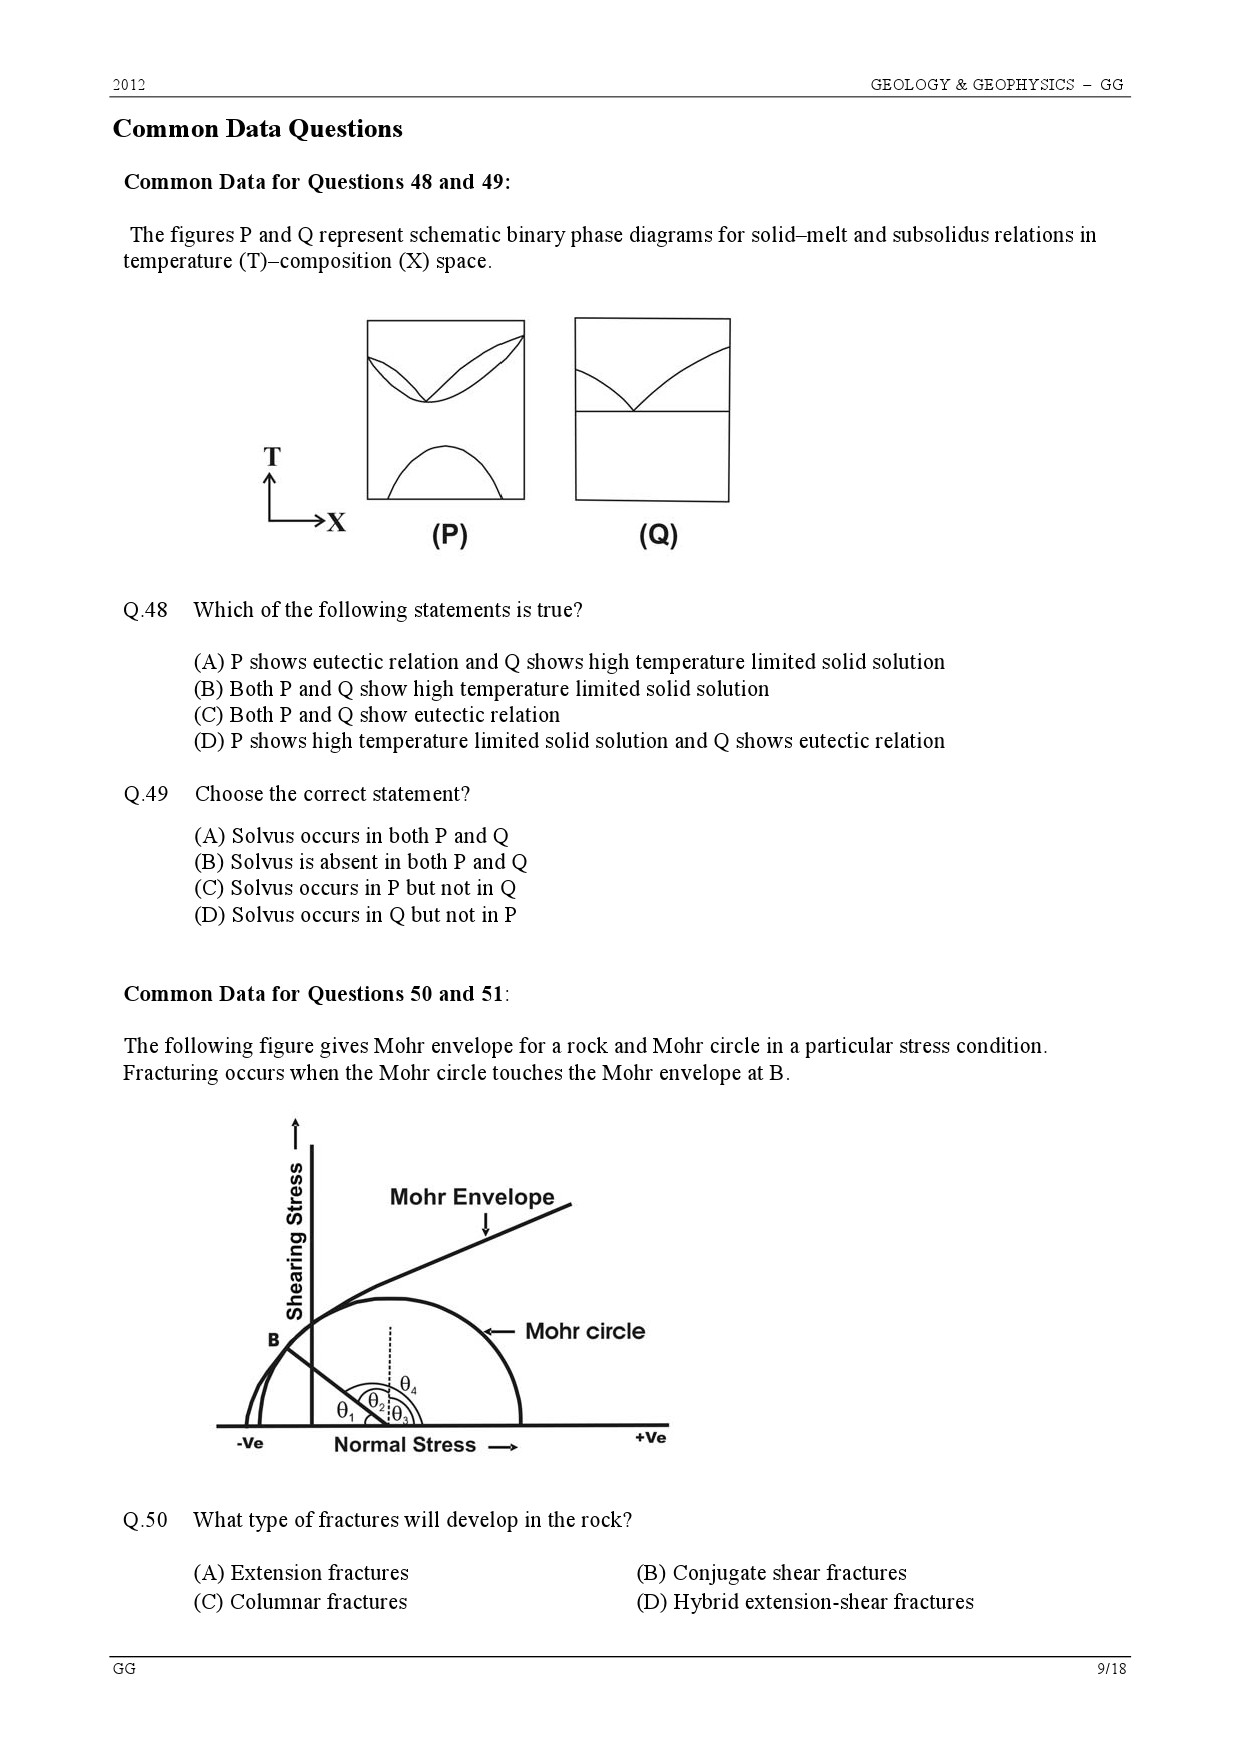 GATE Exam Question Paper 2012 Geology and Geophysics 9